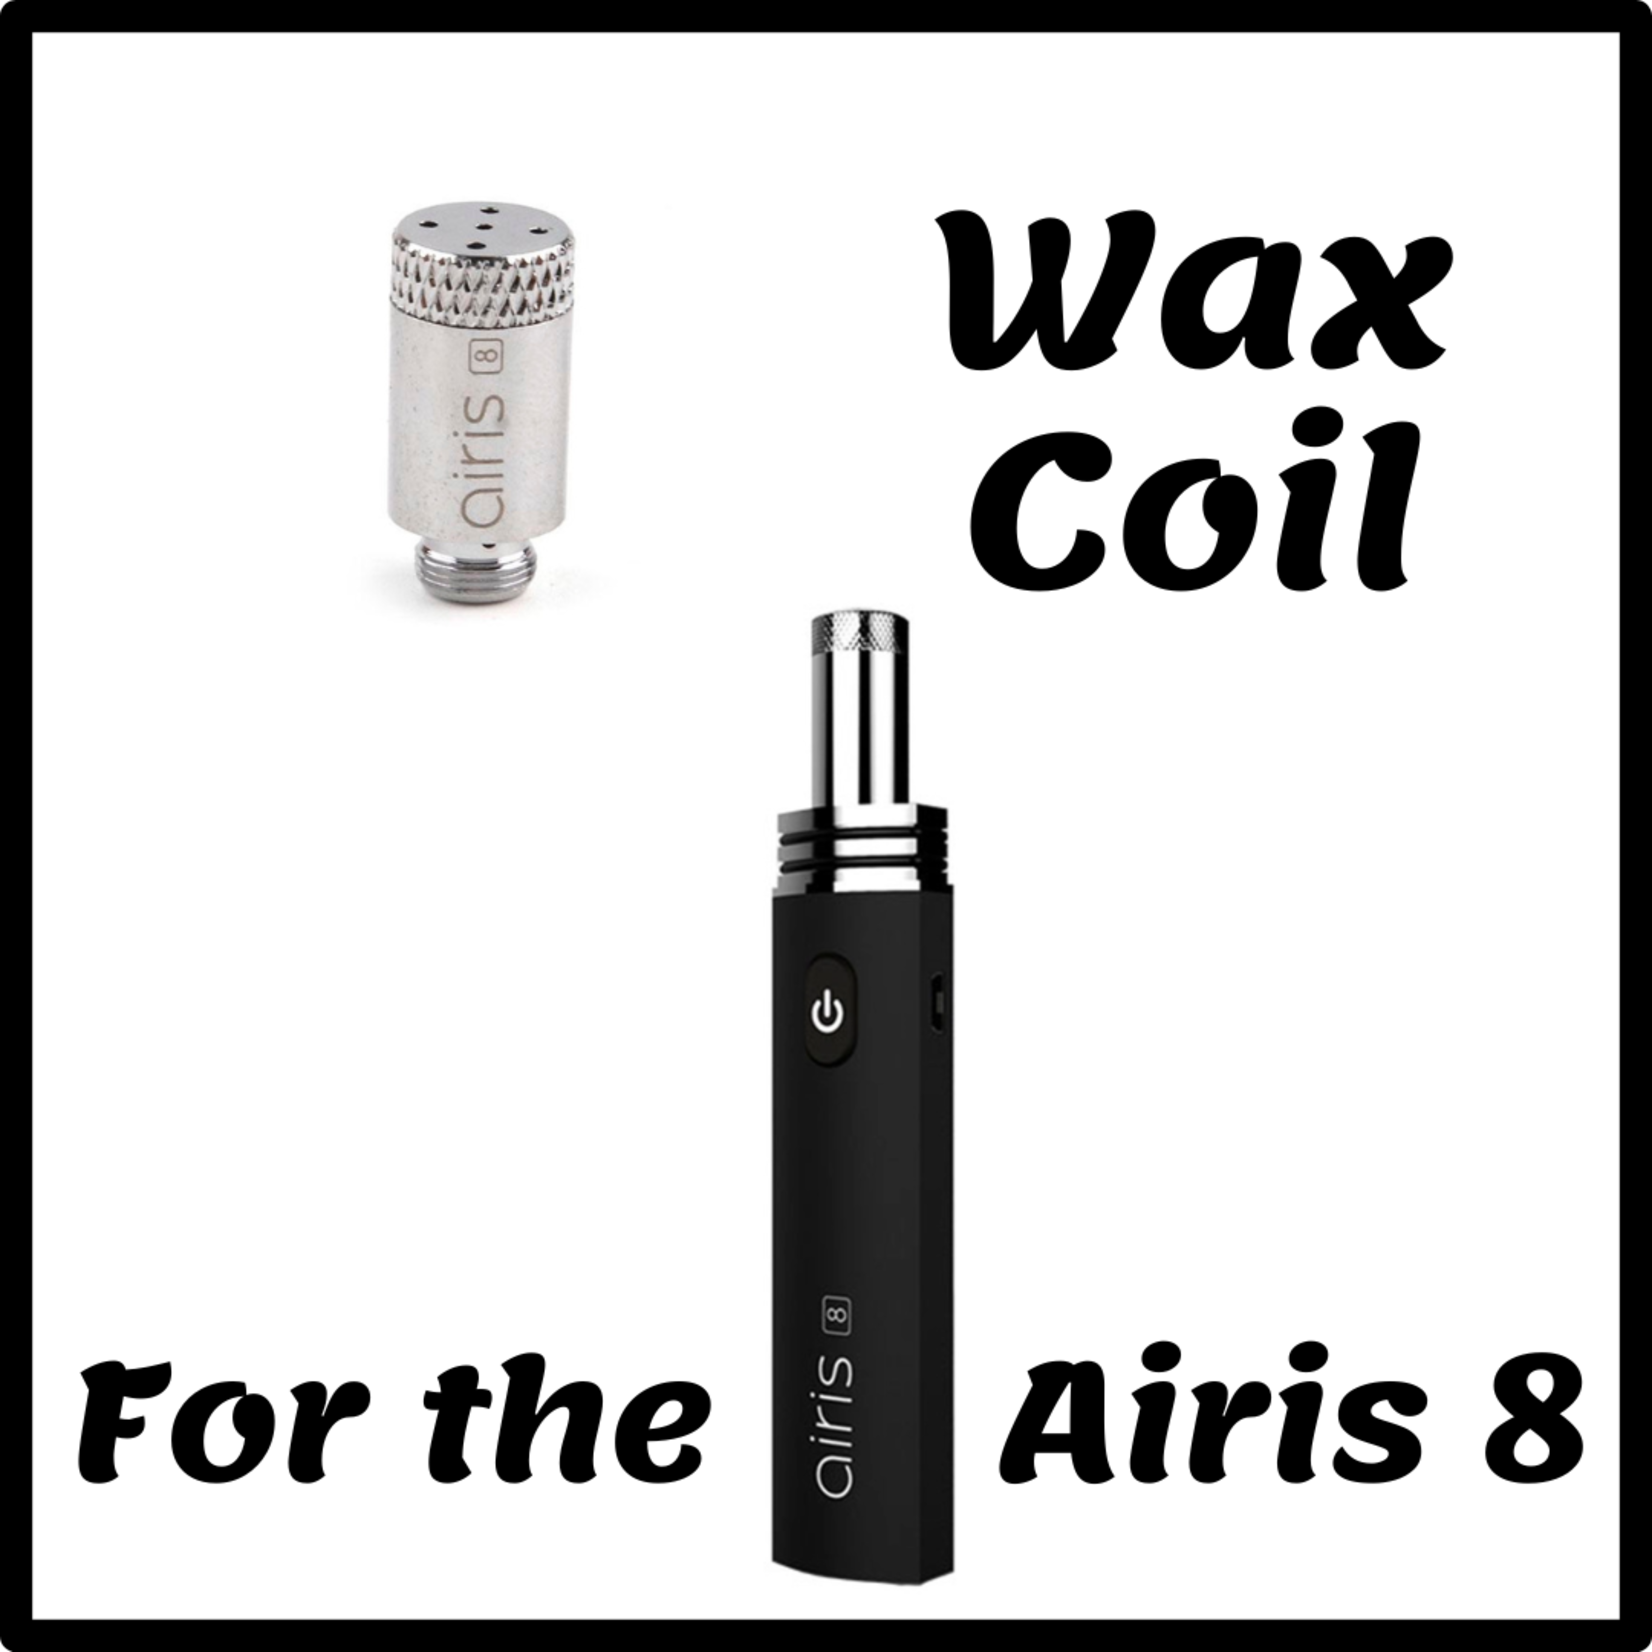 Airis Replacement Coil for Airis 8